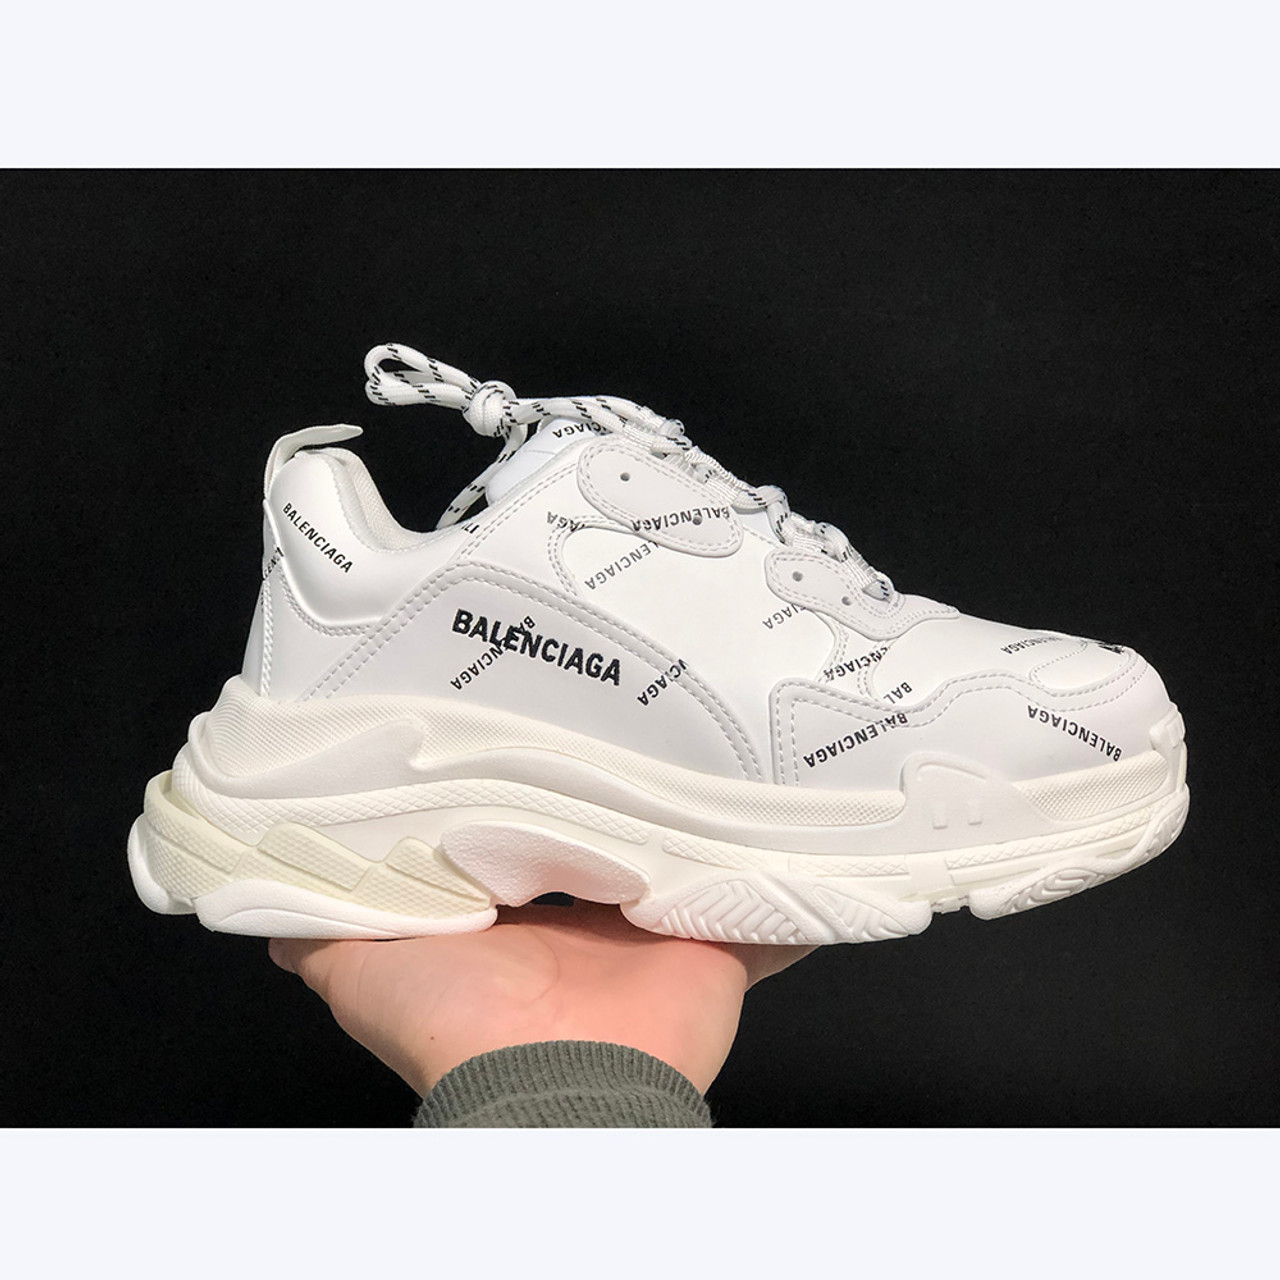 kartoffel slim om forladelse where to buy the best stockX UA High quality replica Balenciaga Triple S  sneakers with Balenciaga all over it ( Black or white colors available)  sneakers Hypedripz is the best high quality